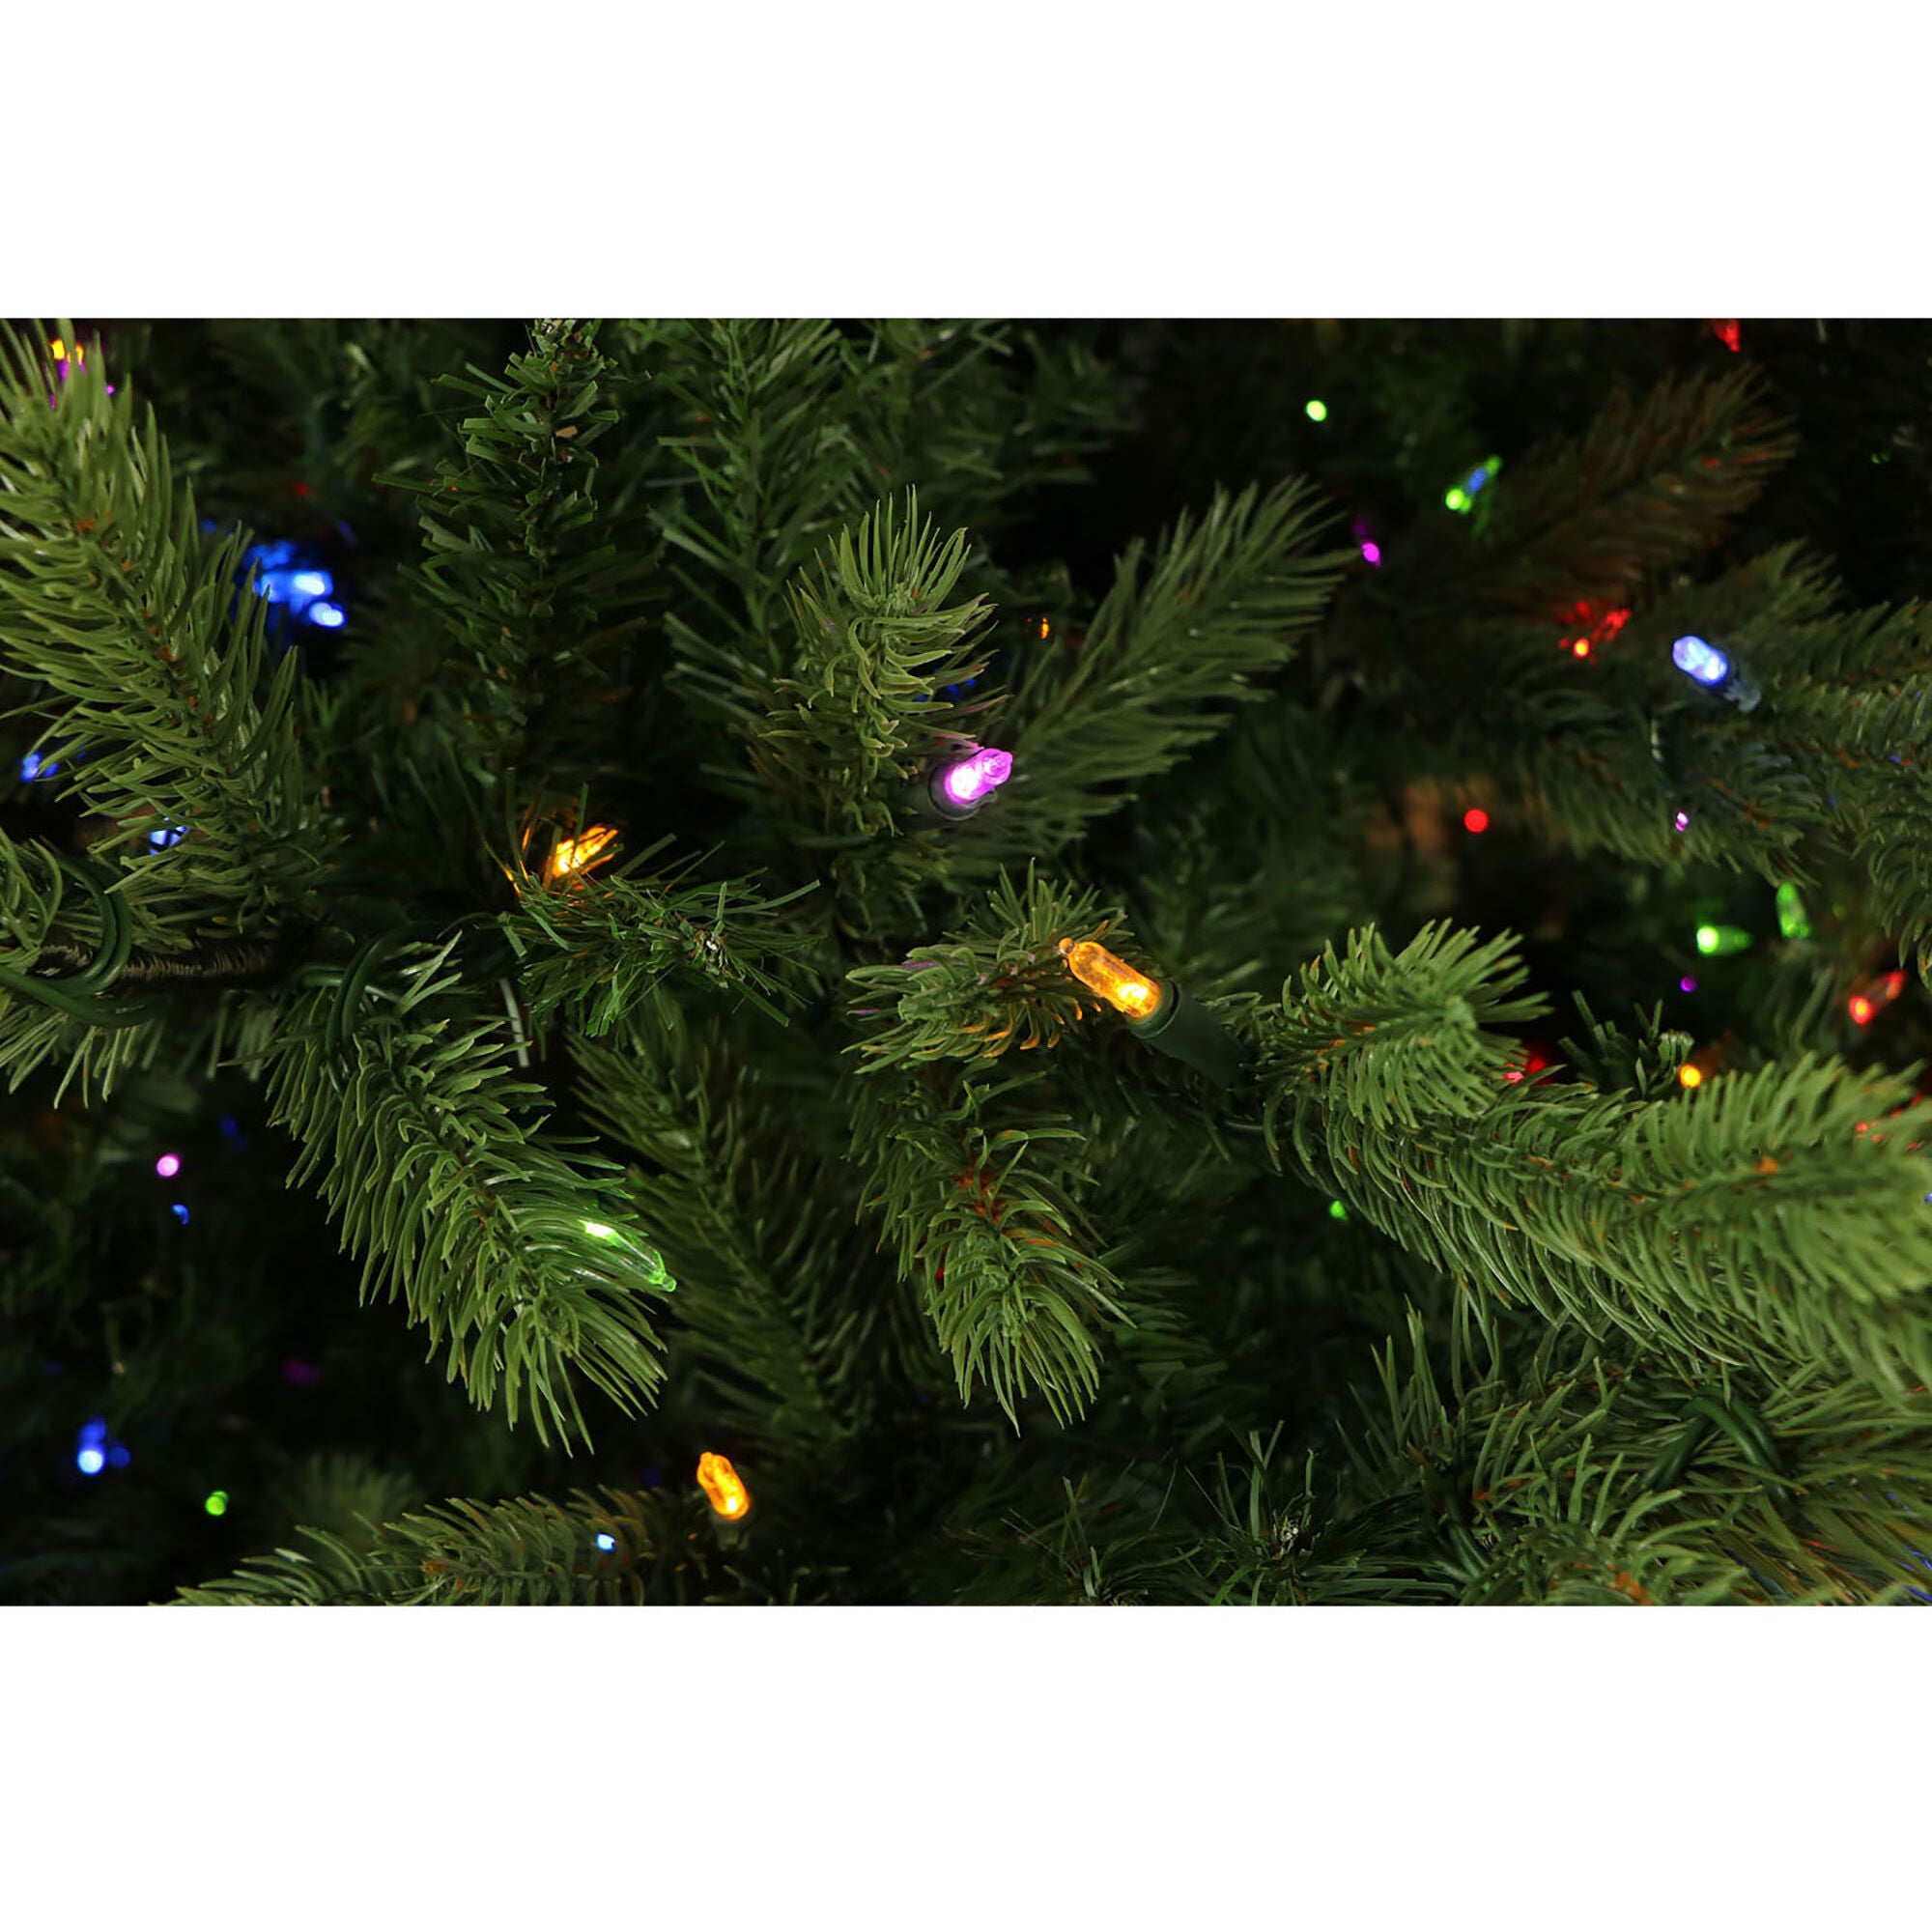 Fraser Hill Farm -  9-Ft. Woodside Pine Christmas Tree with Multi-Color LED Lighting, EZ Connect, and Remote Control